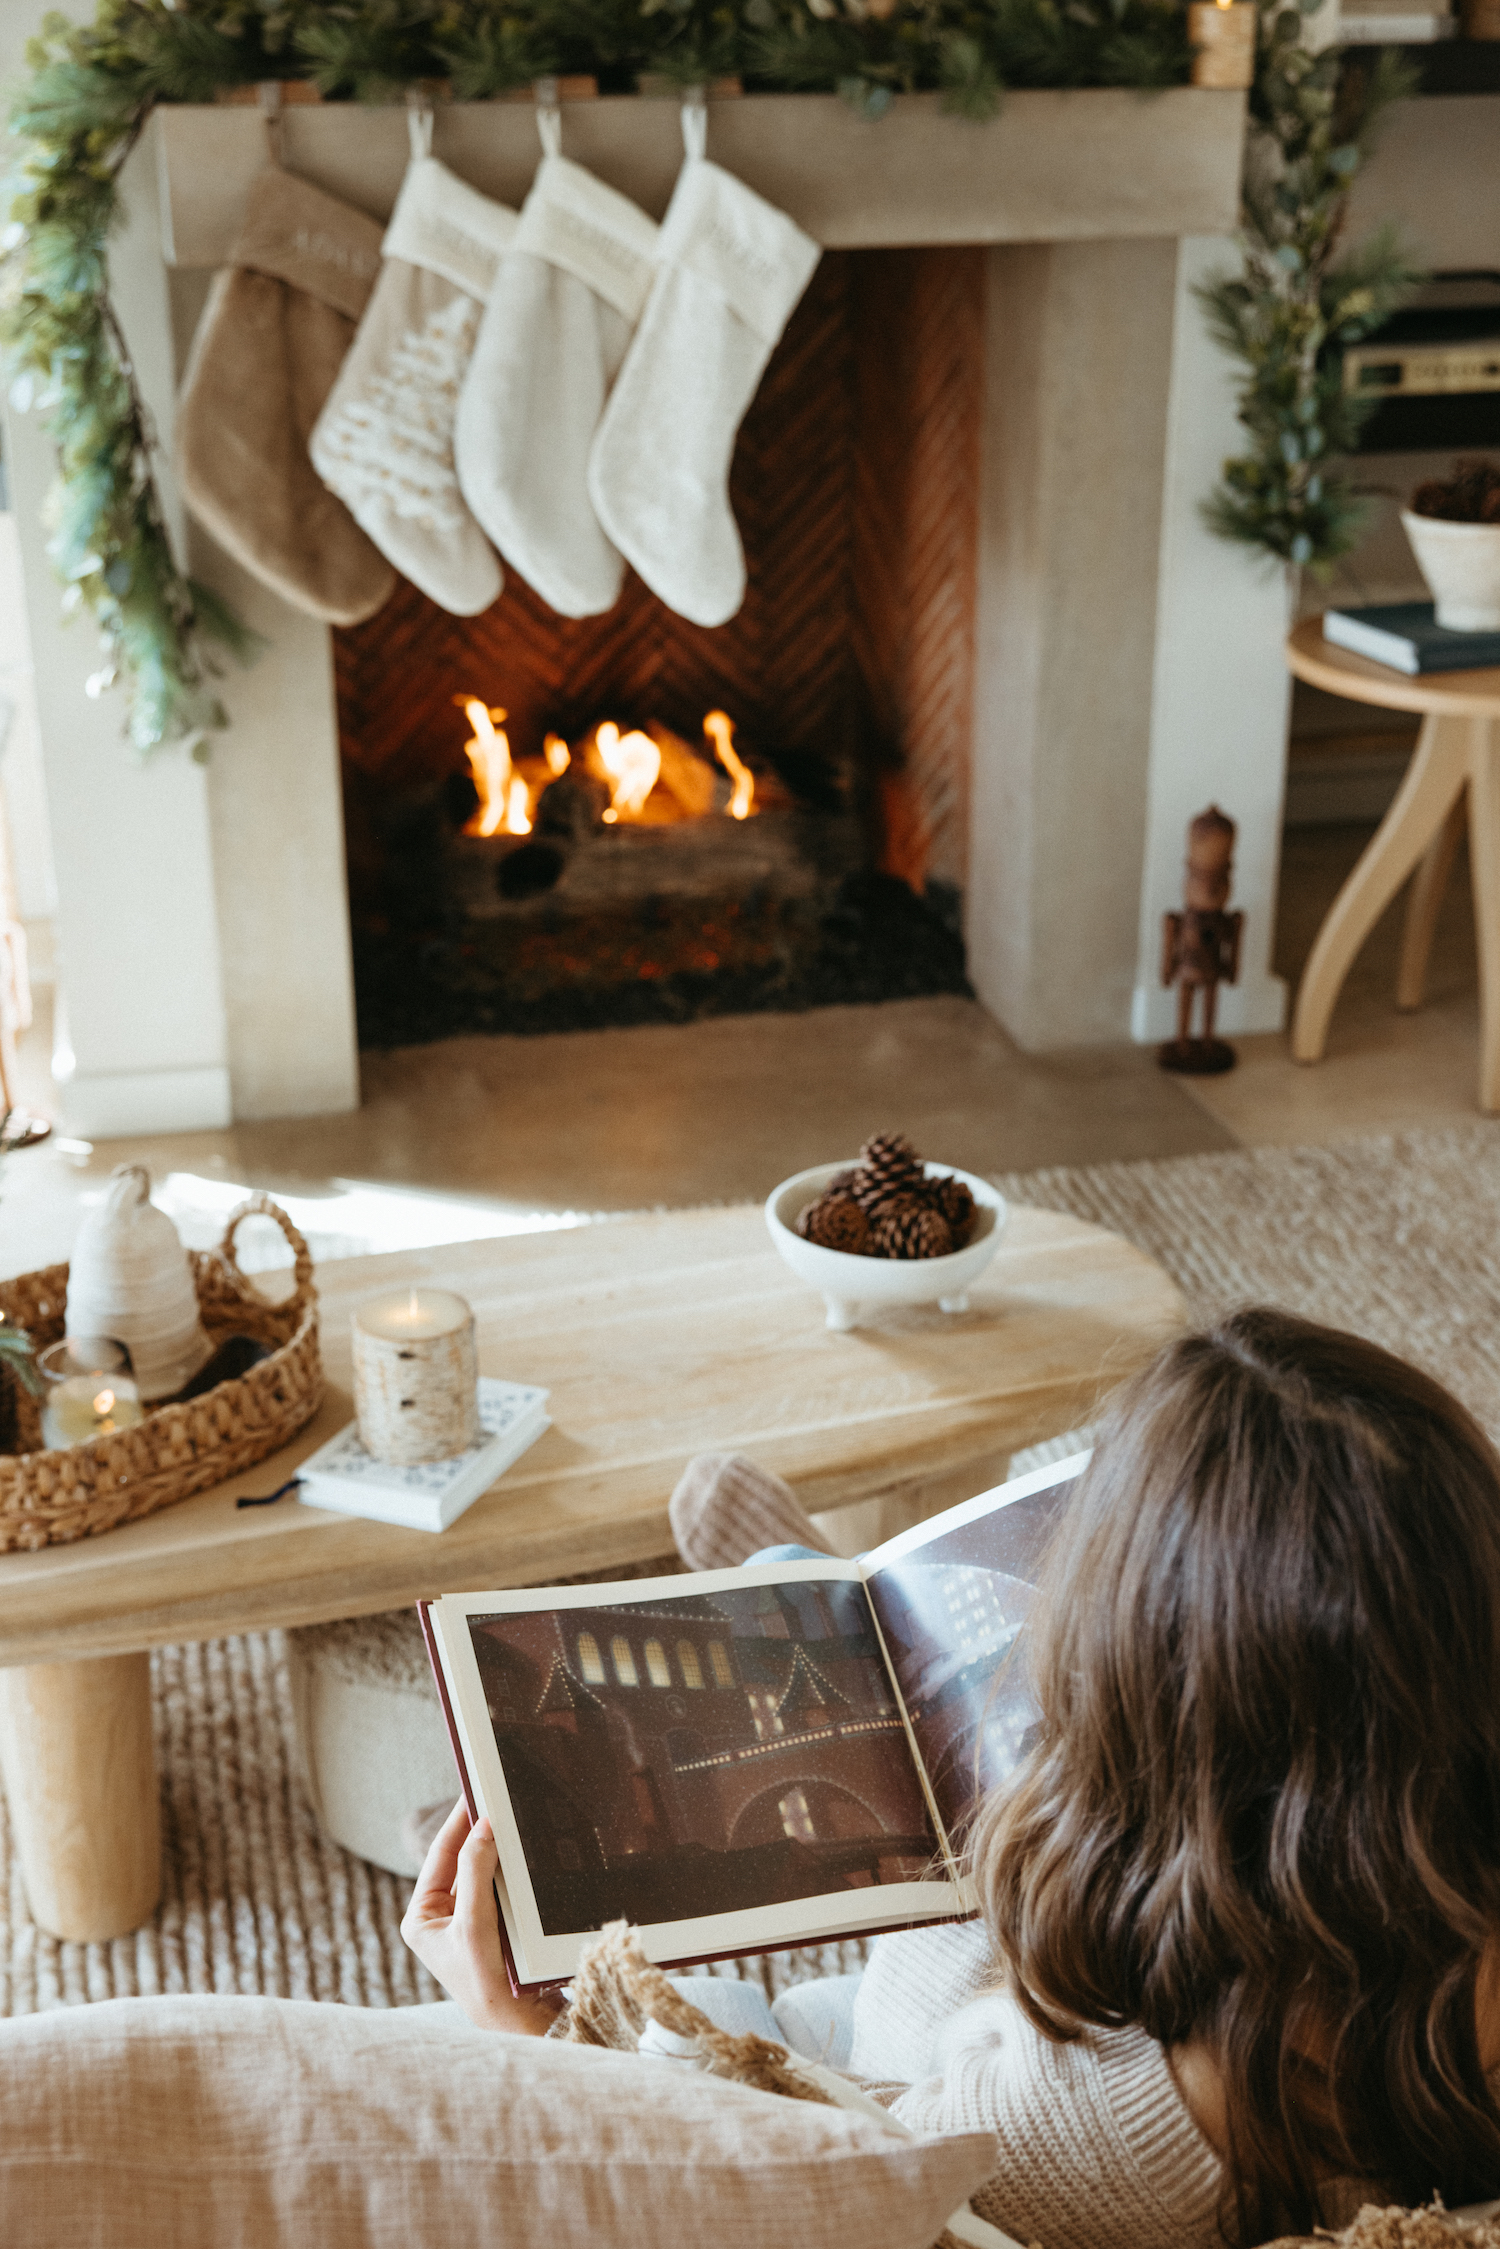 Woman reading book in front of fireplace.